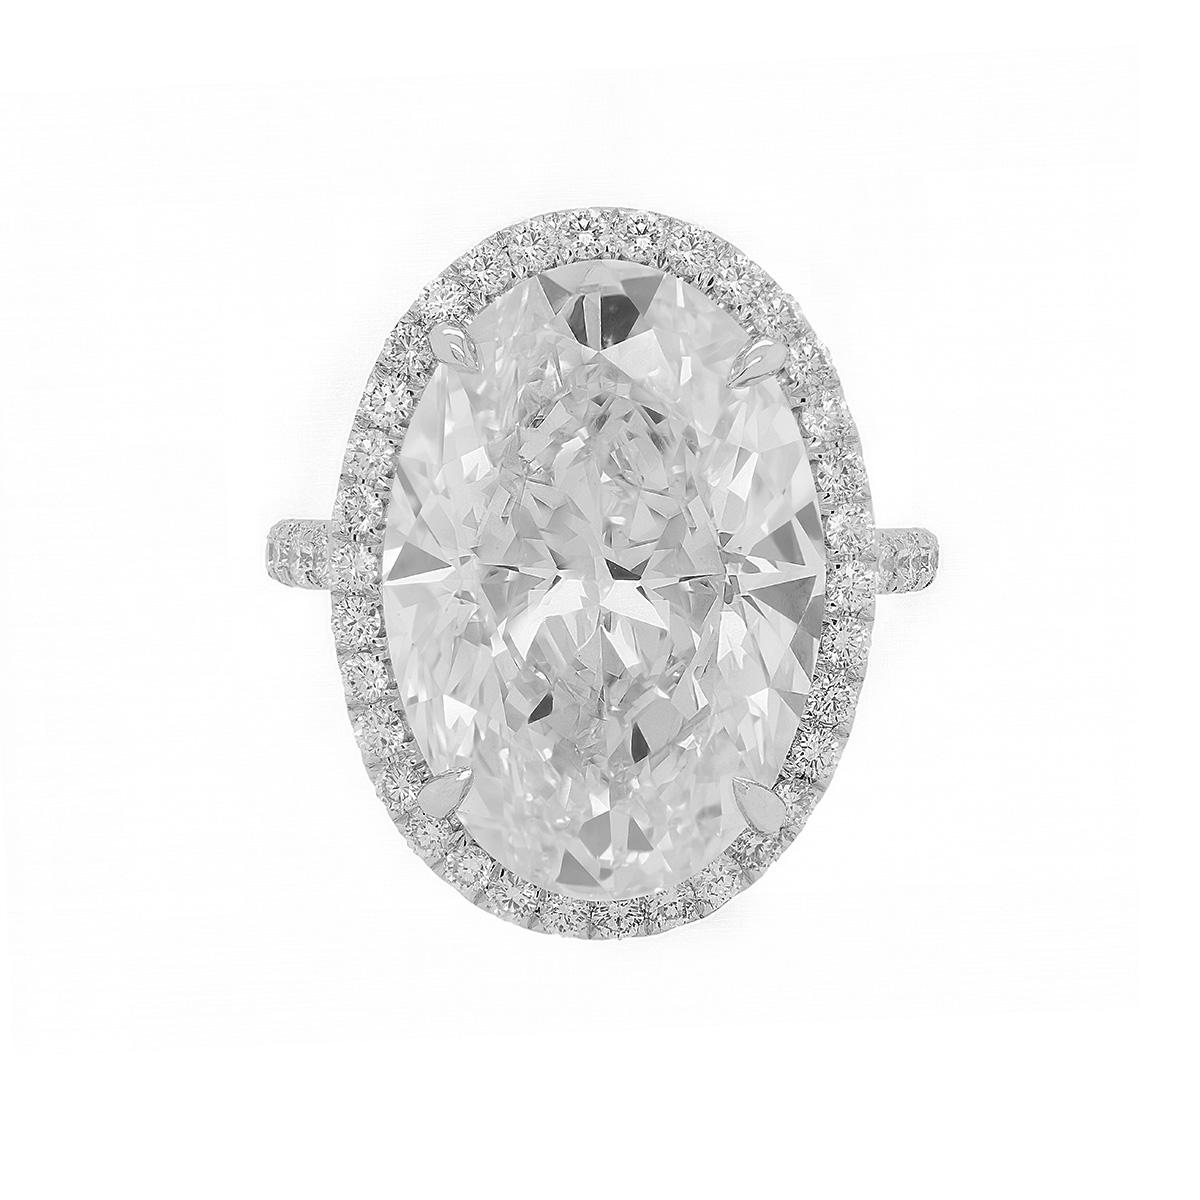 Platinum engagement ring featuring a center 11.77 ct GIA certified (J-VS2) oval cut diamond(OVC254) surrounded by 1.00 cts tw of diamonds in a halo design
Diana M is one-stop shop for all your jewelry shopping, carrying line of diamond rings,